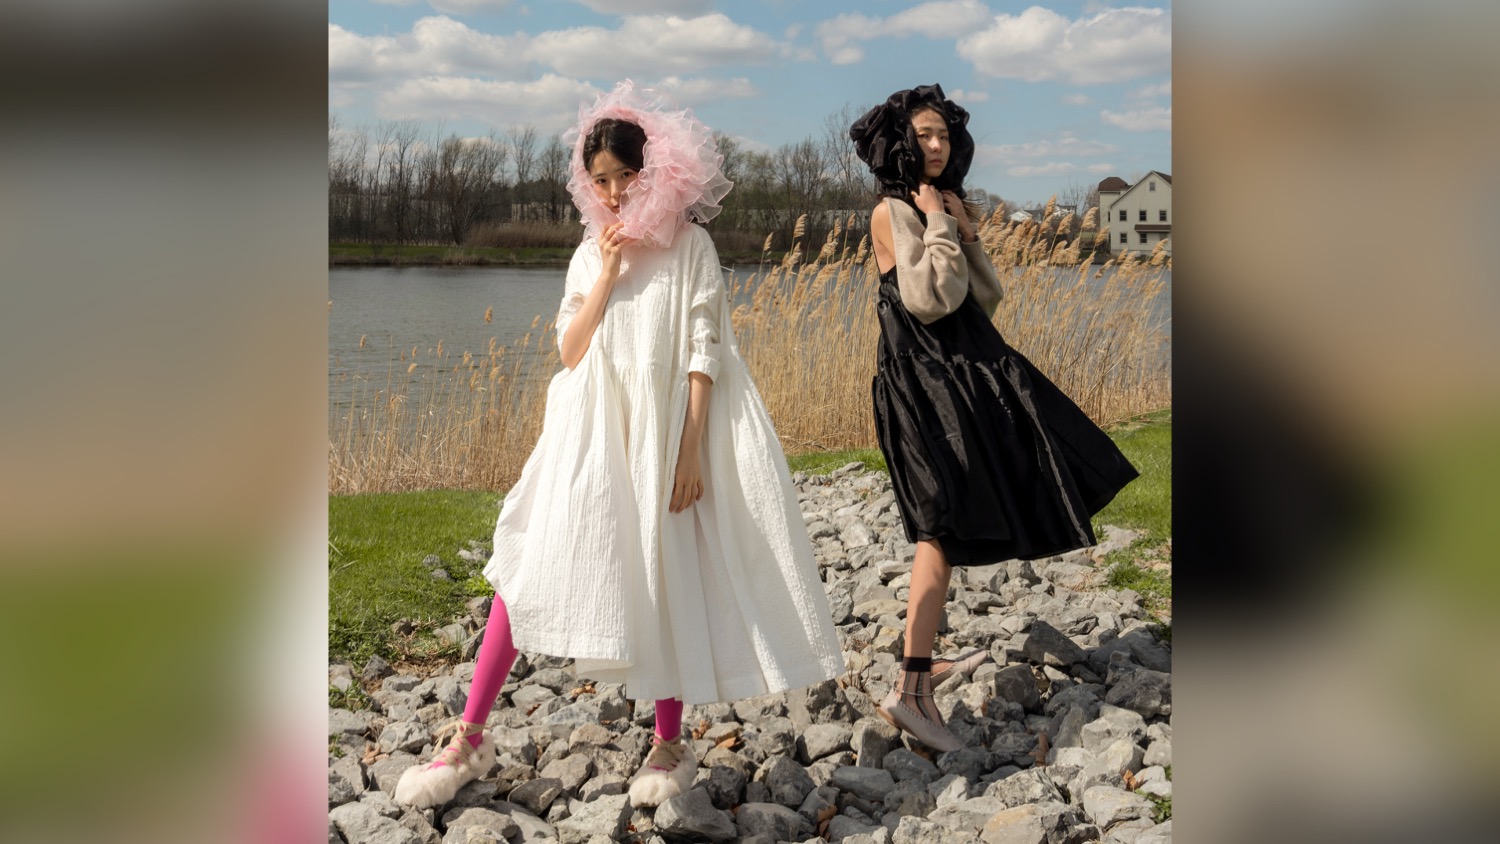 Two people dressed in dresses stand in front of a body of water.